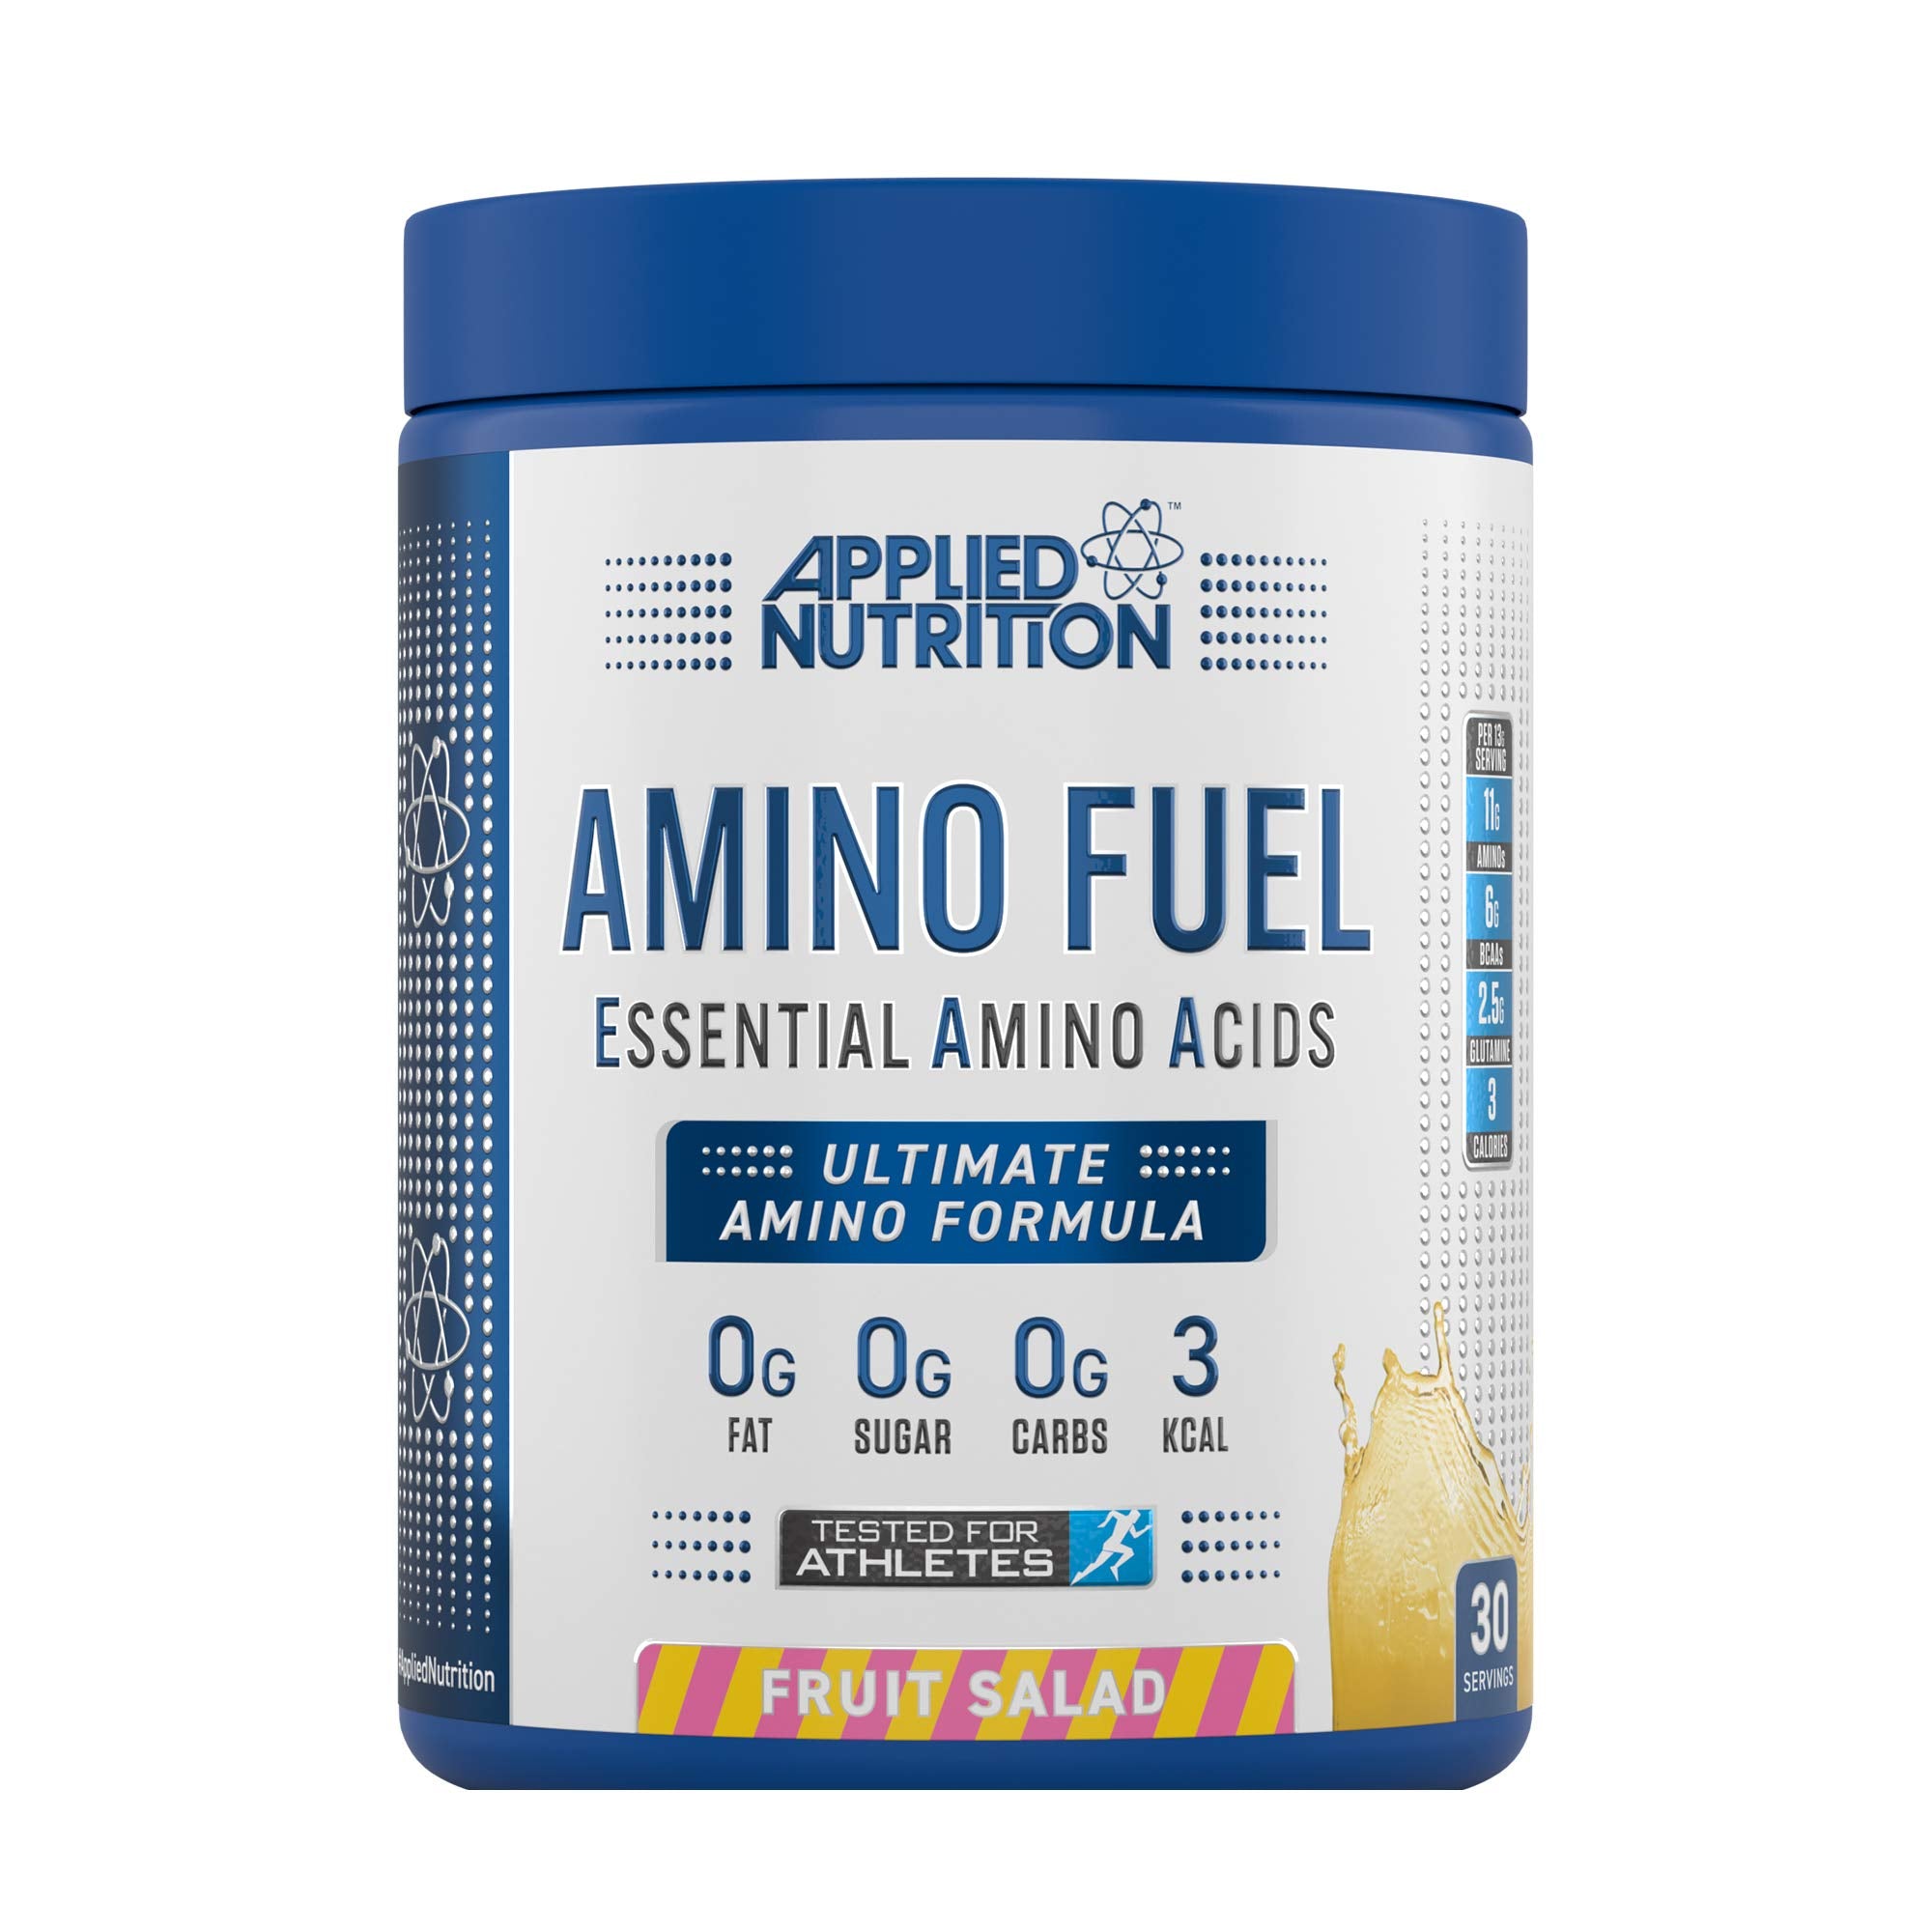 Applied Nutrition Amino Fuel - Essential Amino Acid (EAA) Powder Supplement Maximize Muscle Growth, 11g of Aminos Per Serving with BCAA’s 390g - 30 Servings (Fruit Salad)